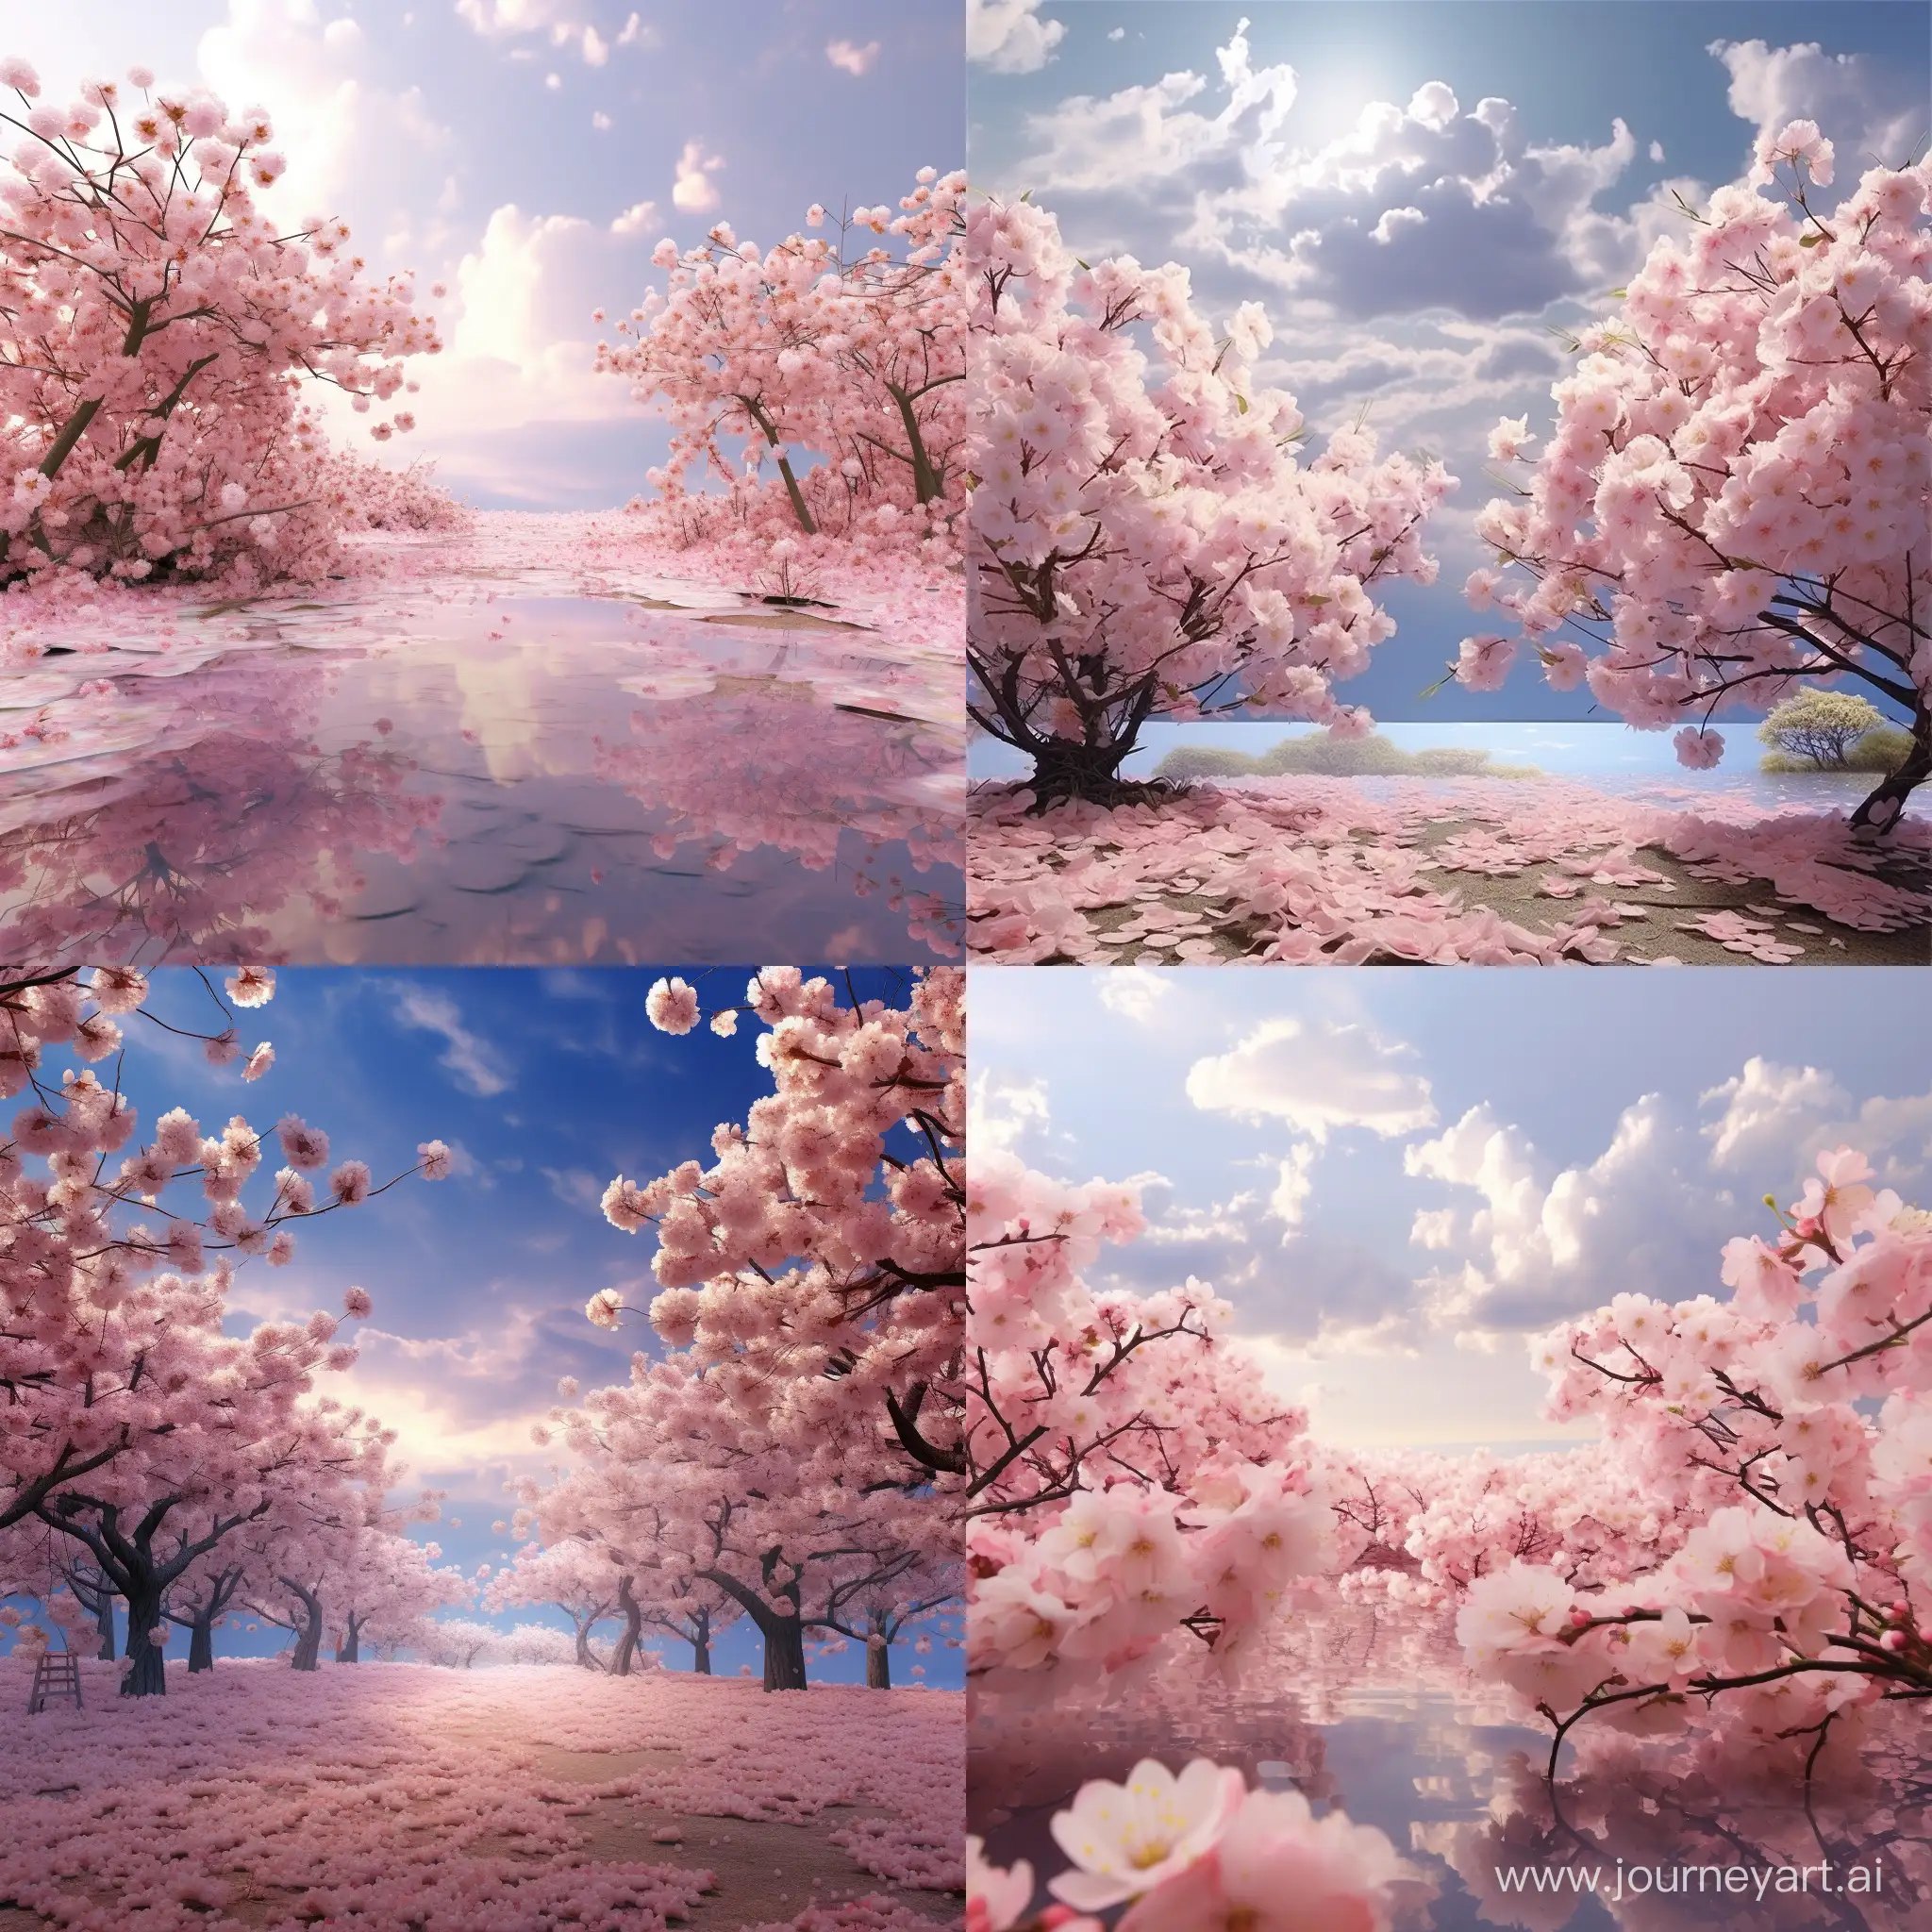 Tranquil-Sky-with-Intruding-Cherry-Blossoms-Photorealistic-Digital-Photography